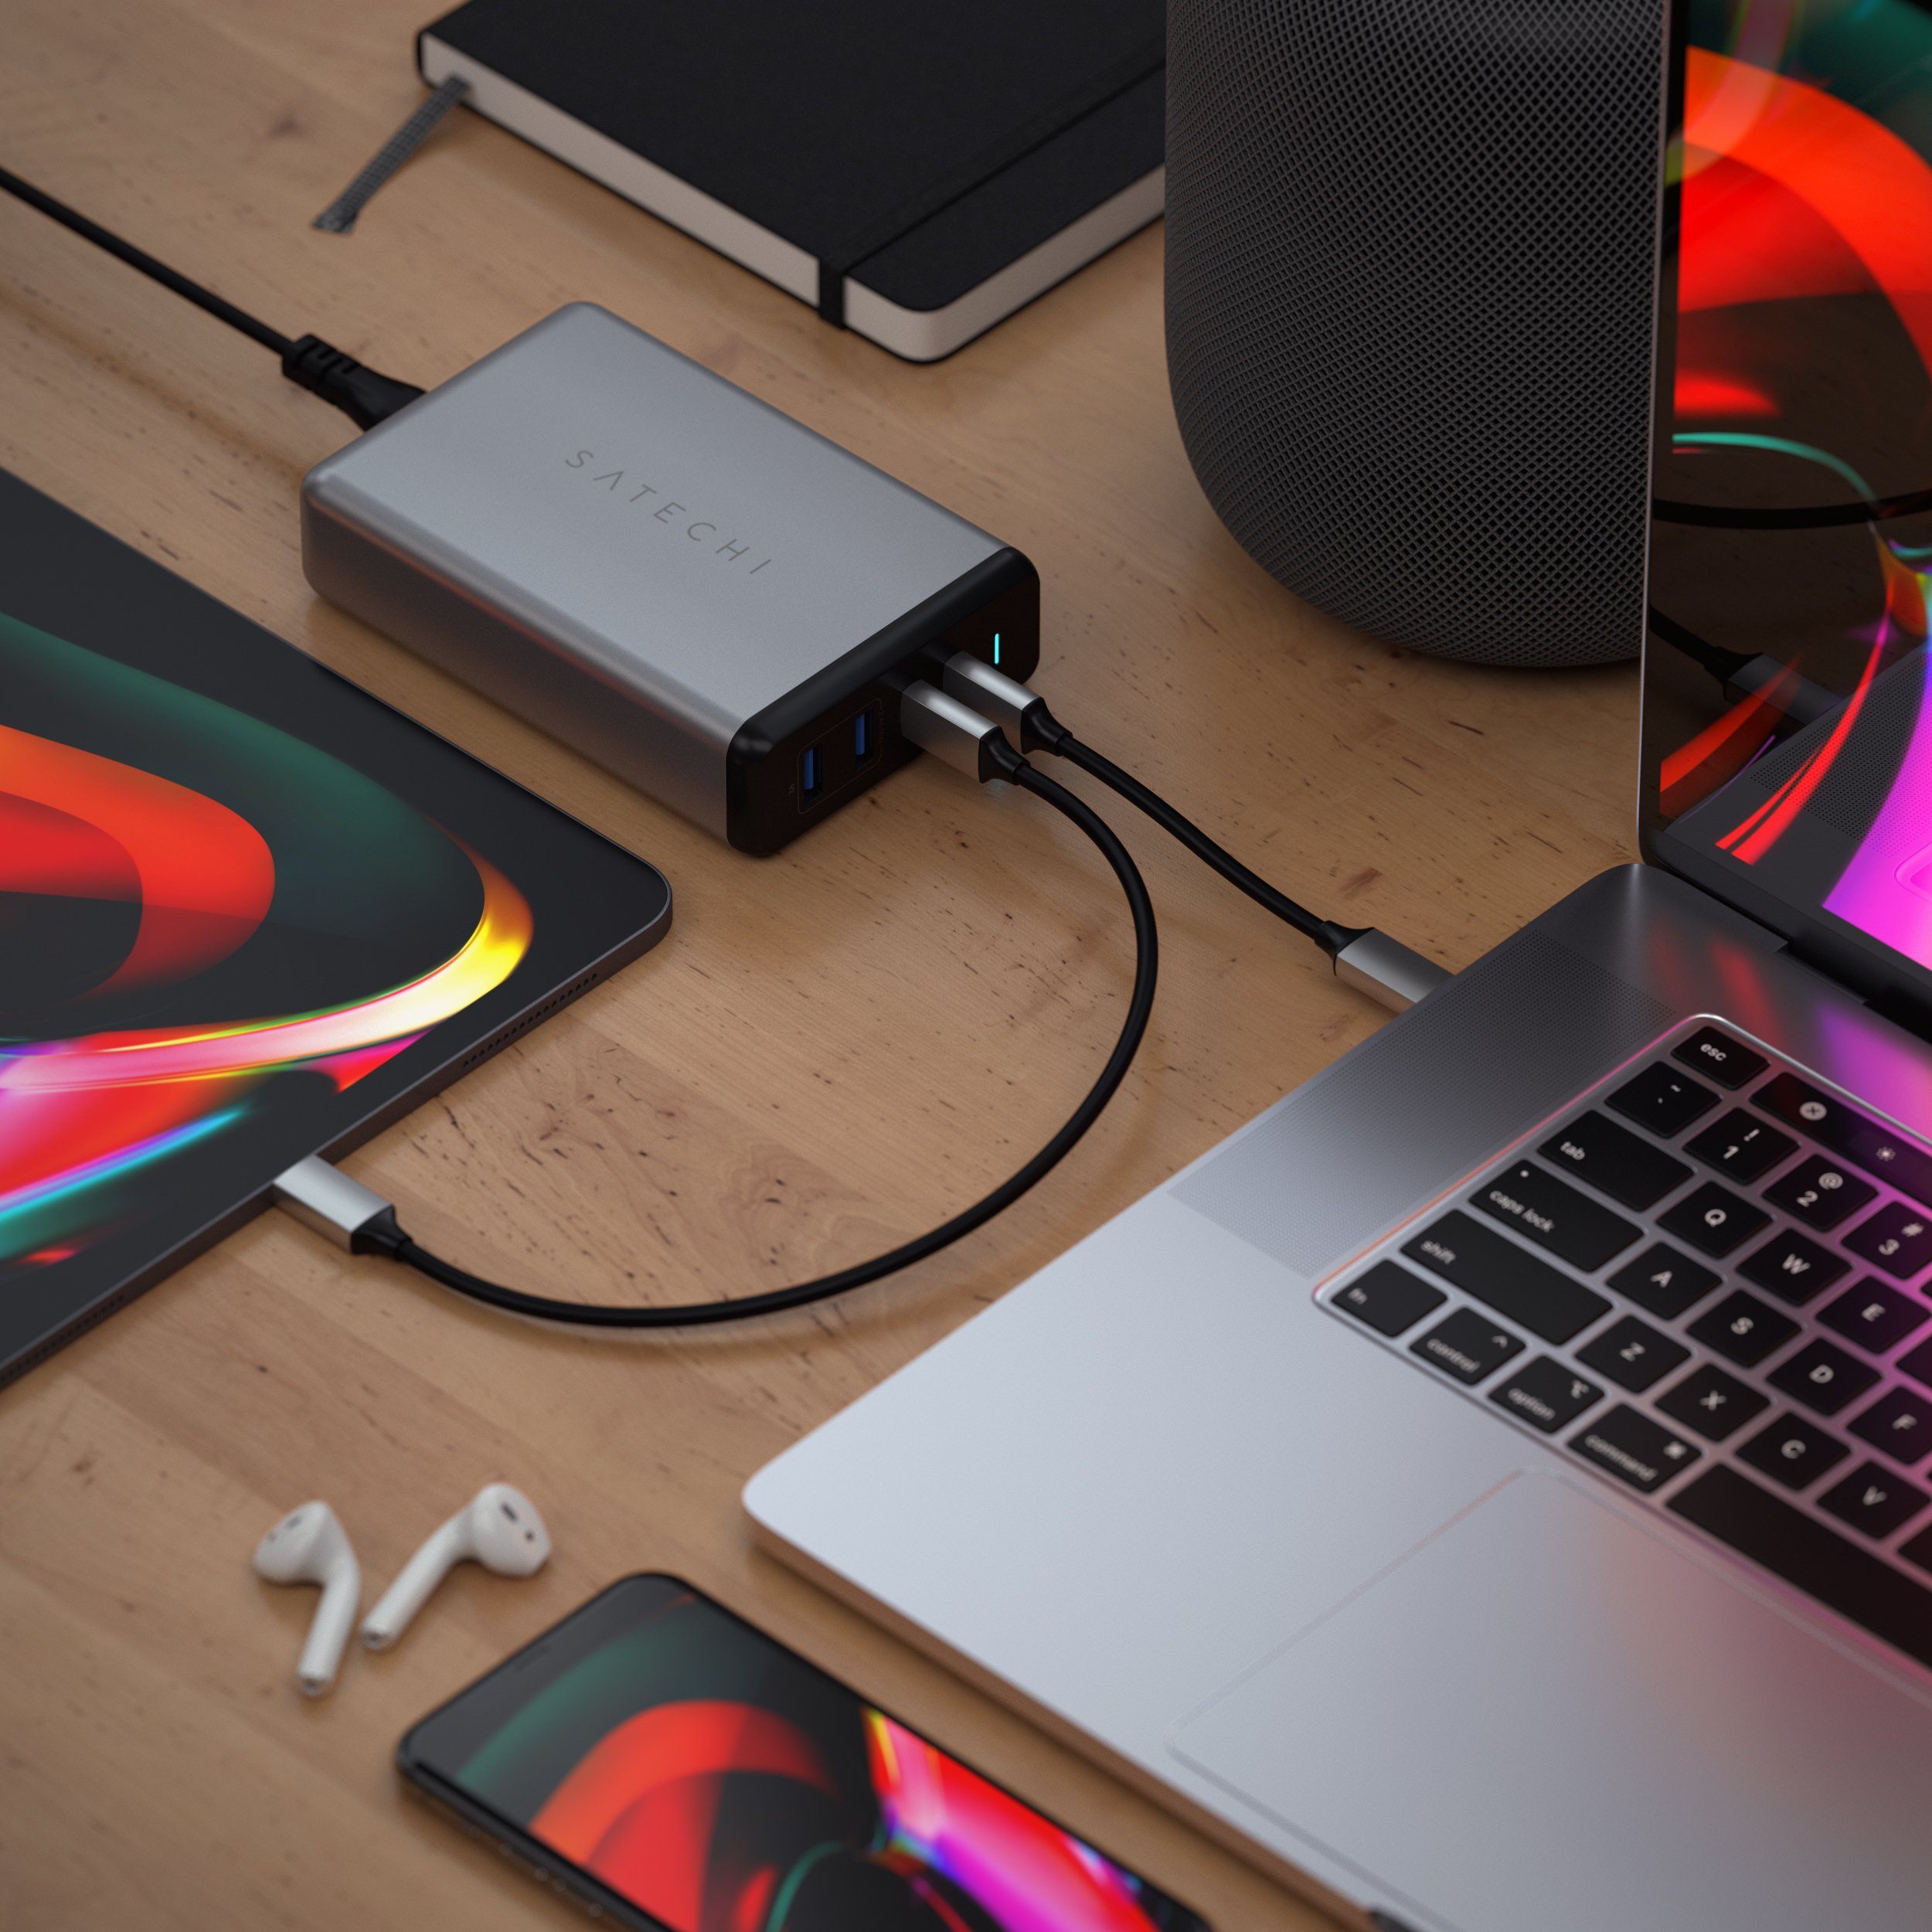 Satechi 108W pro usb-c pd desktop wall charger on a desk charging a MacBook Pro and iPad 